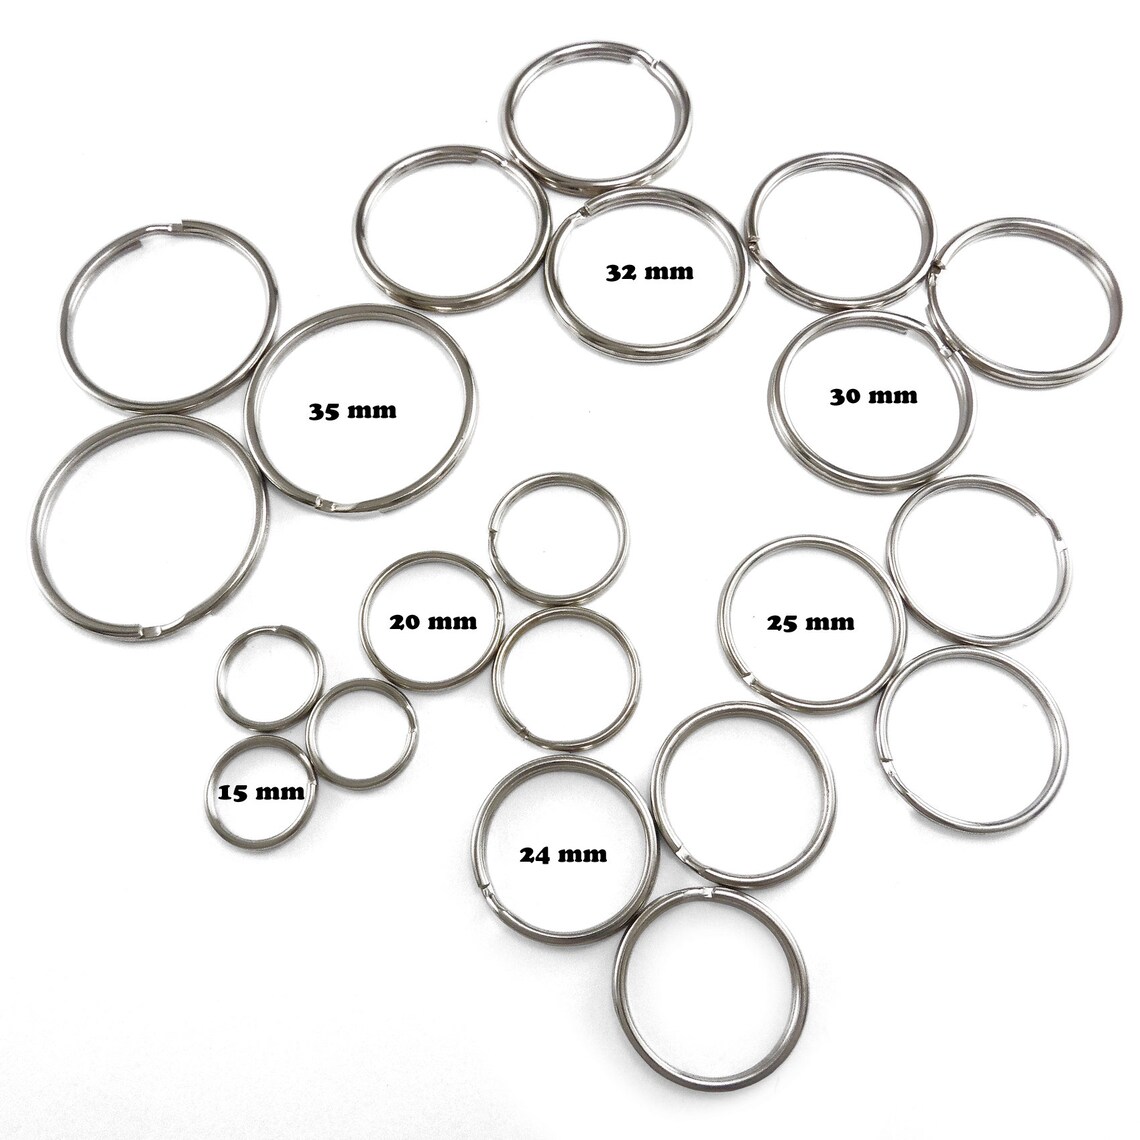 Split Ring Keyring 15mm 16mm 20mm 24mm 25mm 30mm 32mm 35mm Ideal for ...